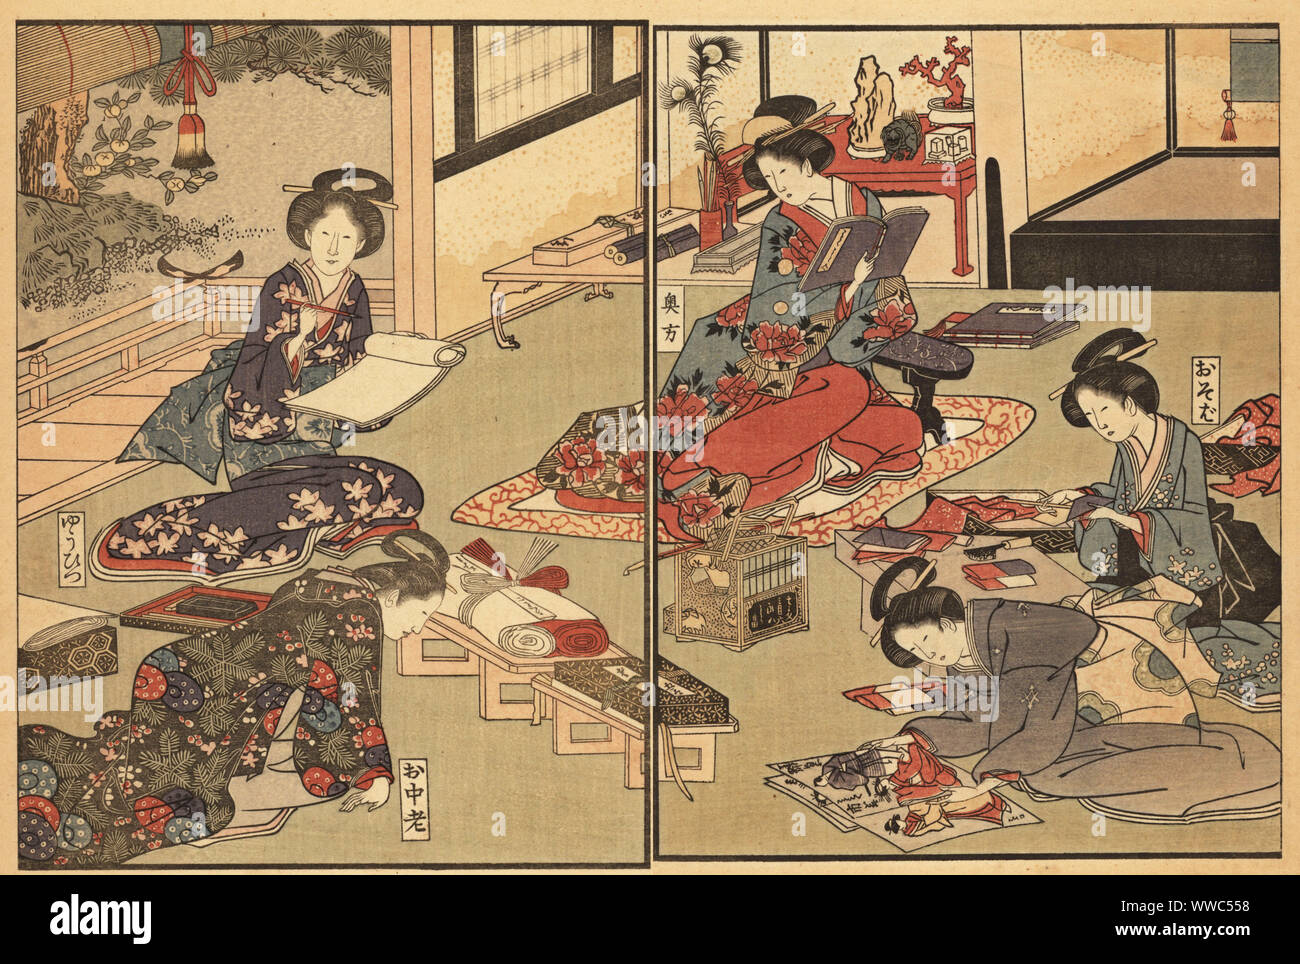 Wife of the elite samurai class reading books, with other women writing with a pen, one looking at ukiyo-e prints, and one folding paper. Another woman delivers reams of paper and ink. The alcove is decorated with coral, scrolls, feathers, etc. Handcoloured ukiyo-e woodblock print by Toyokuni Utagawa from Shikitei Sanba’s Ehon Imayo Sugata (Picture Book of the Modern Forms and Figures, Tokyo, 1916. Reprint of the original from 1802. Stock Photo